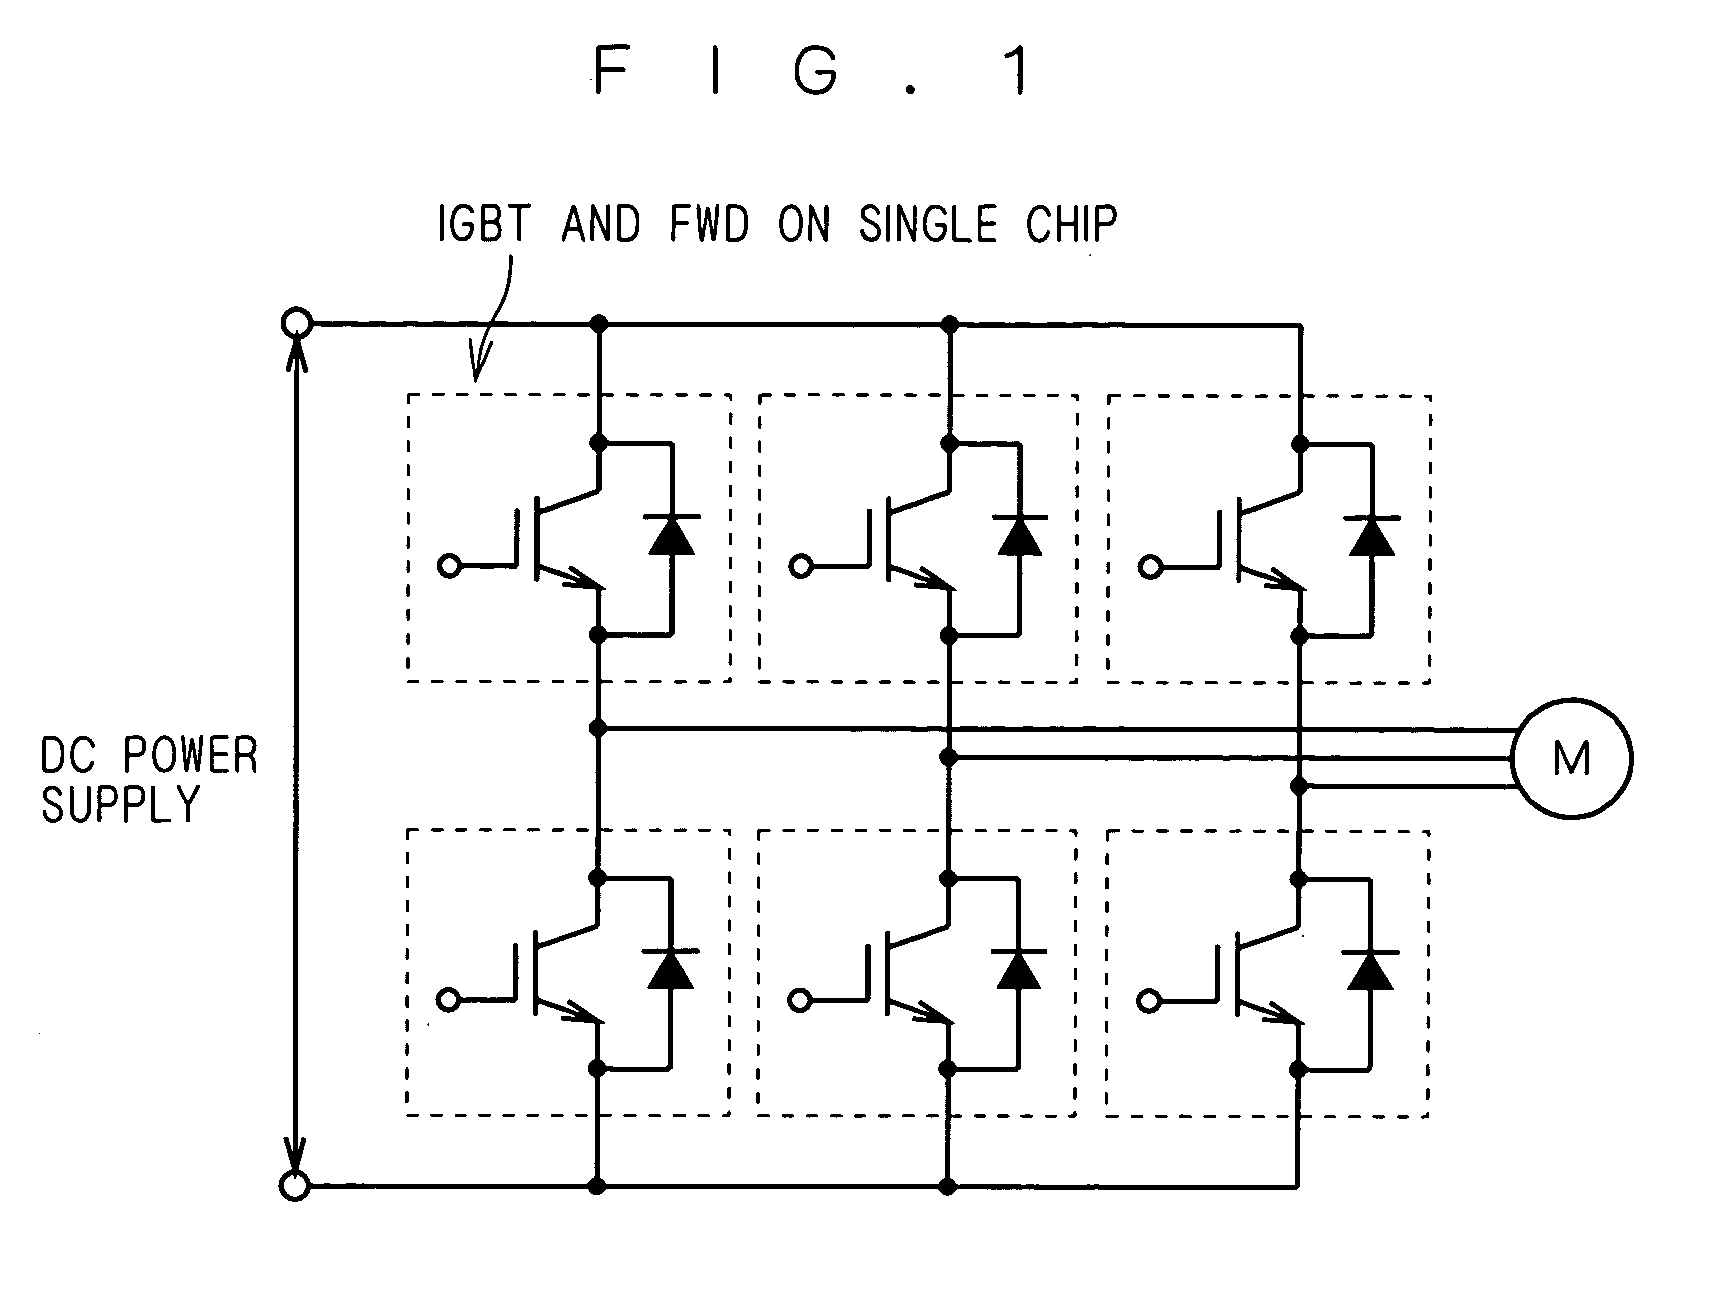 Insulated gate bipolar transistor with built-in freewheeling diode